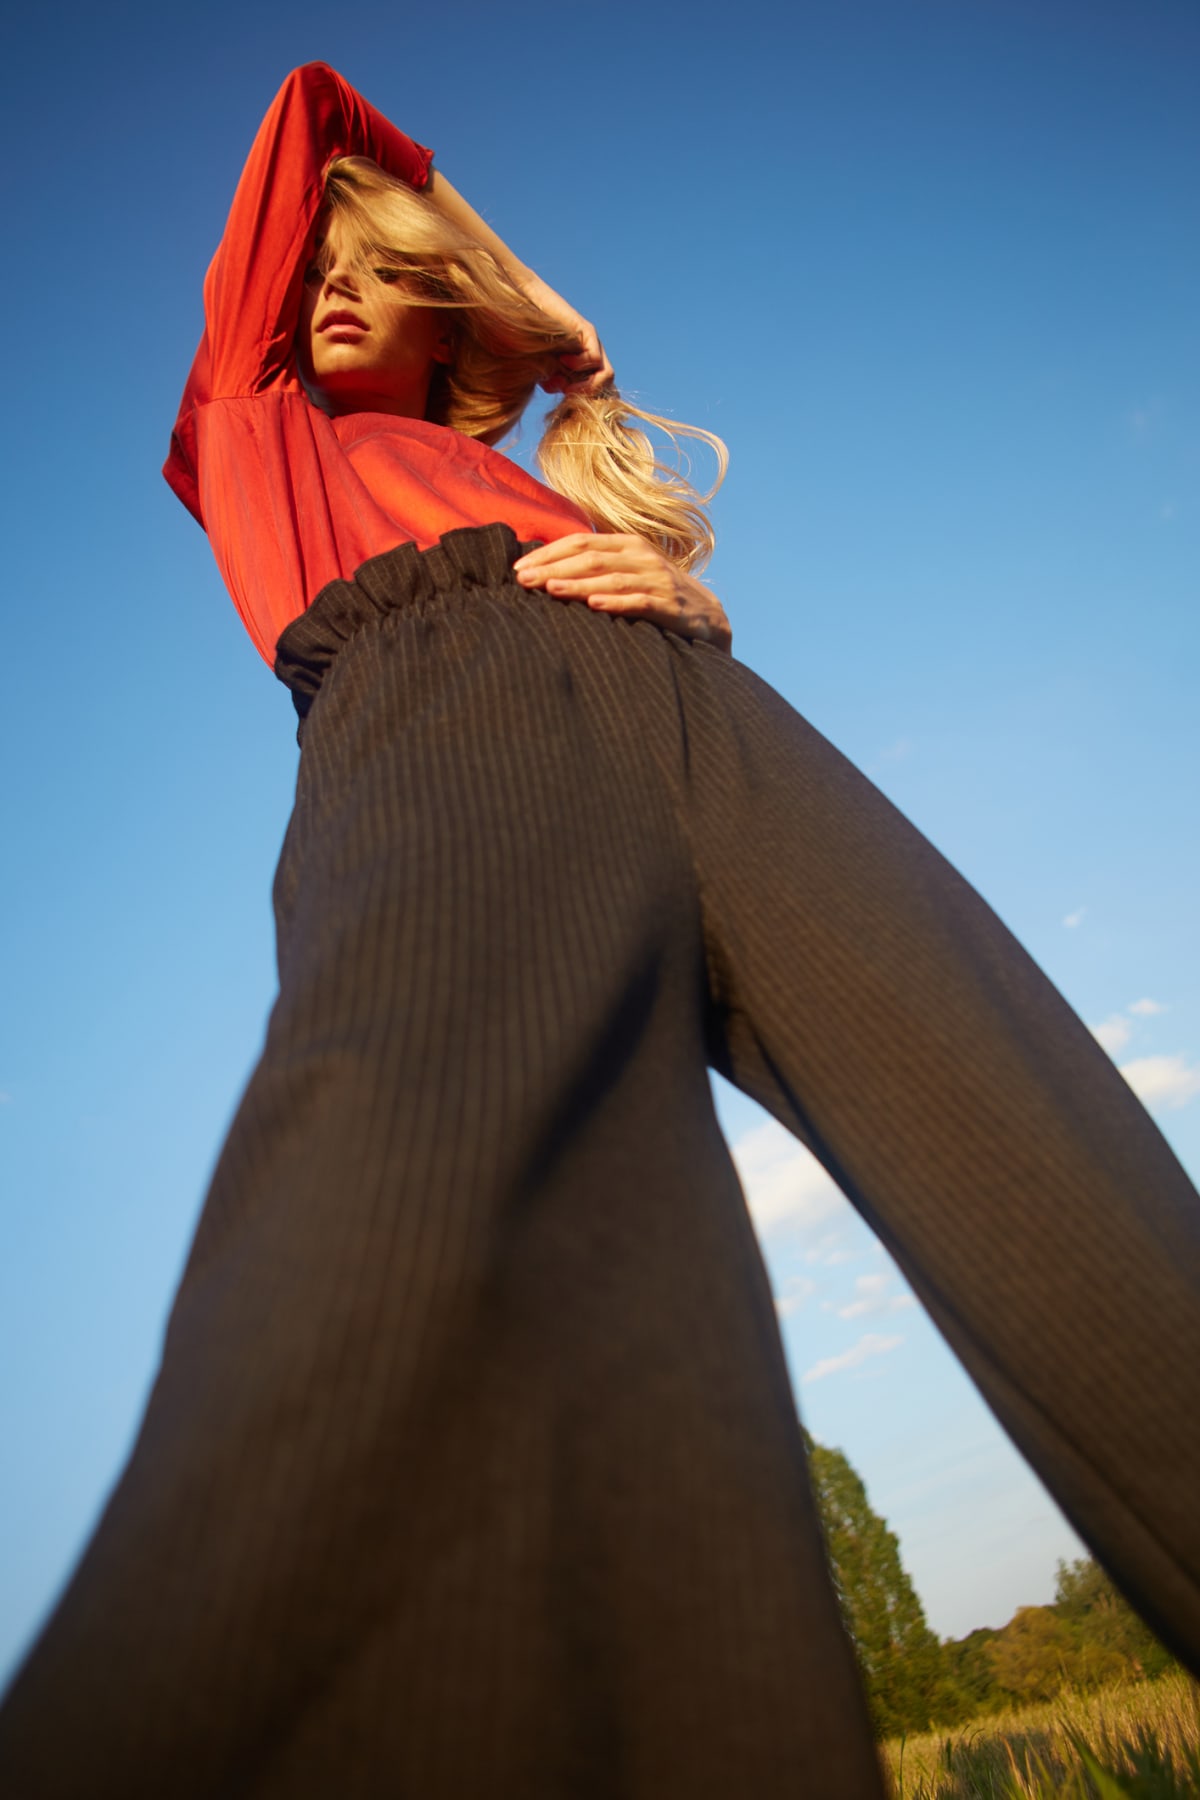 Bottom view of a woman wearing high-waisted brown pants and red top